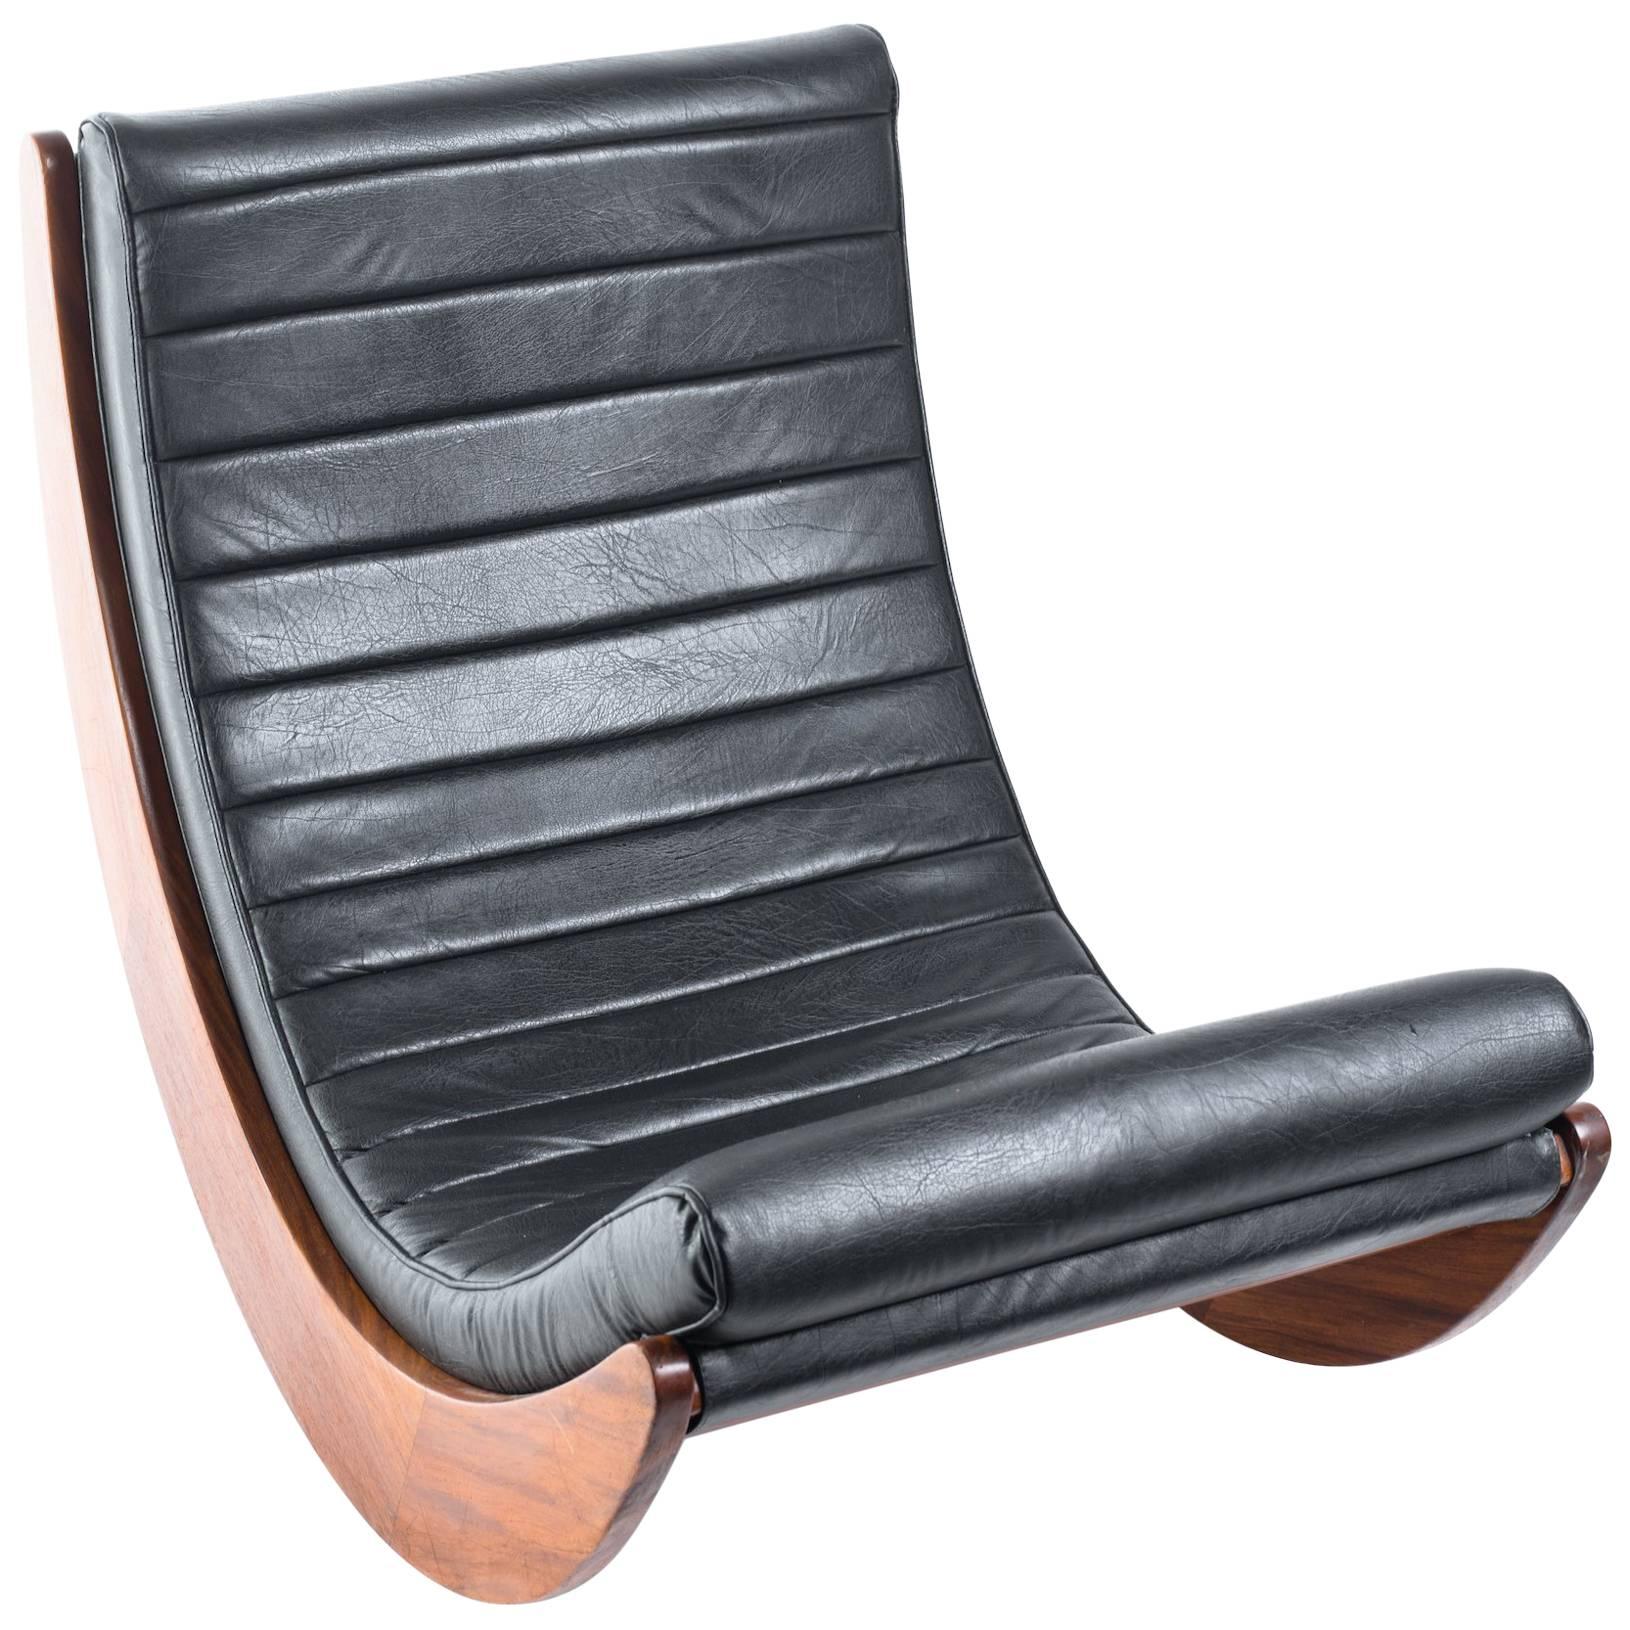 Klein Dienst sculptural faux leather rosewood rocker. Originally purchased in 2005 for $4500.00 at the International Contemporary Furniture Show in NYC.